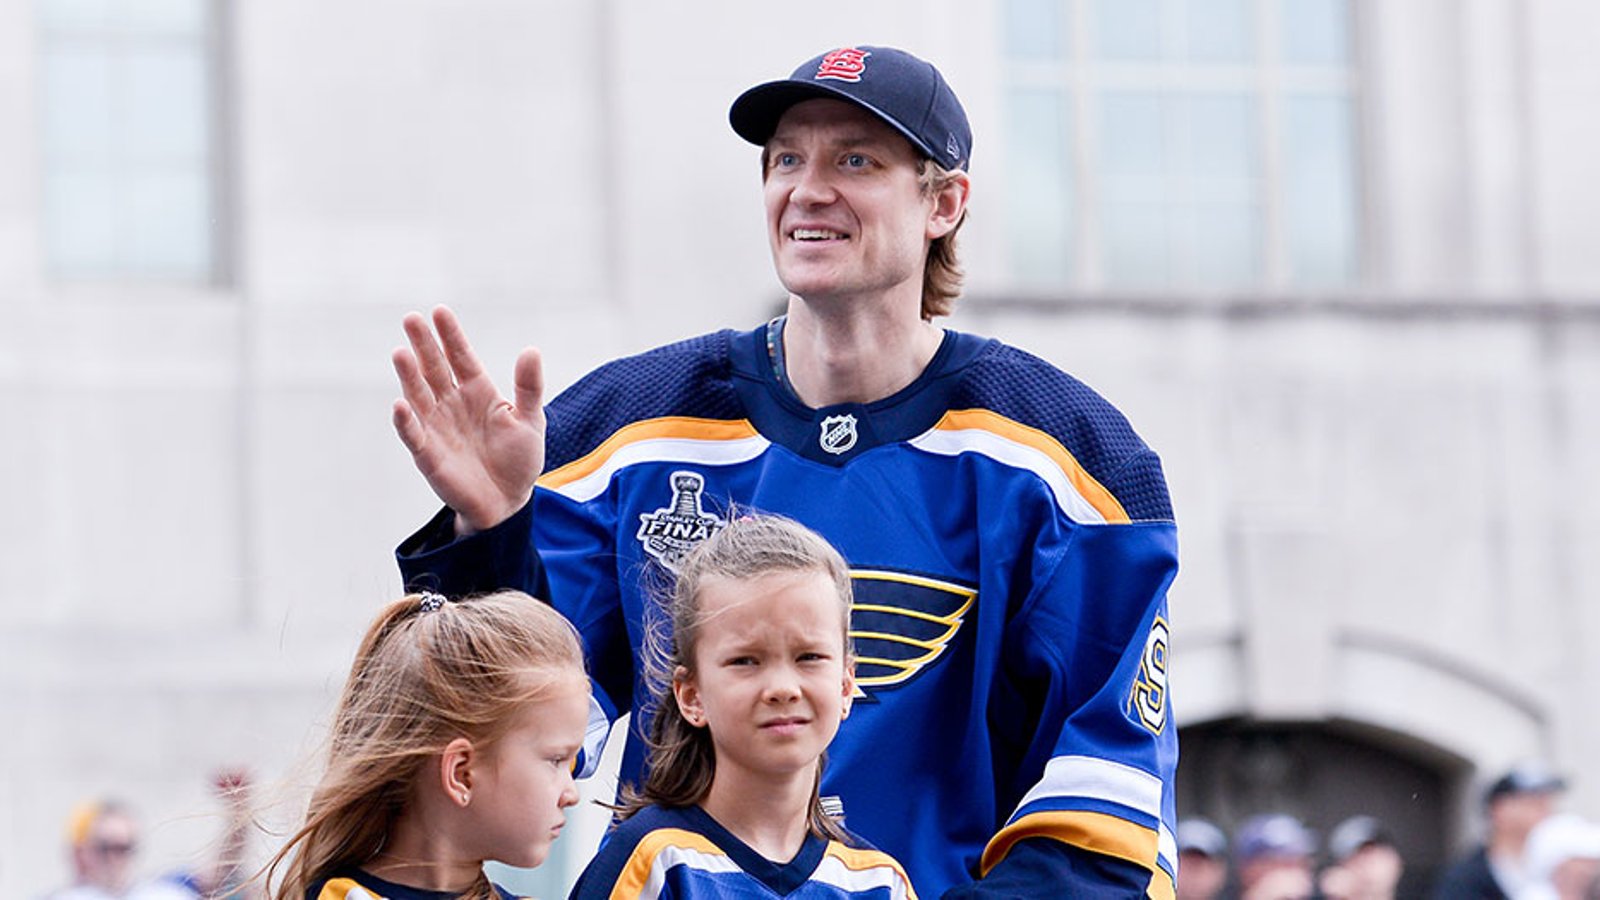 Bouwmeester speaks for the first time since cardiac incident